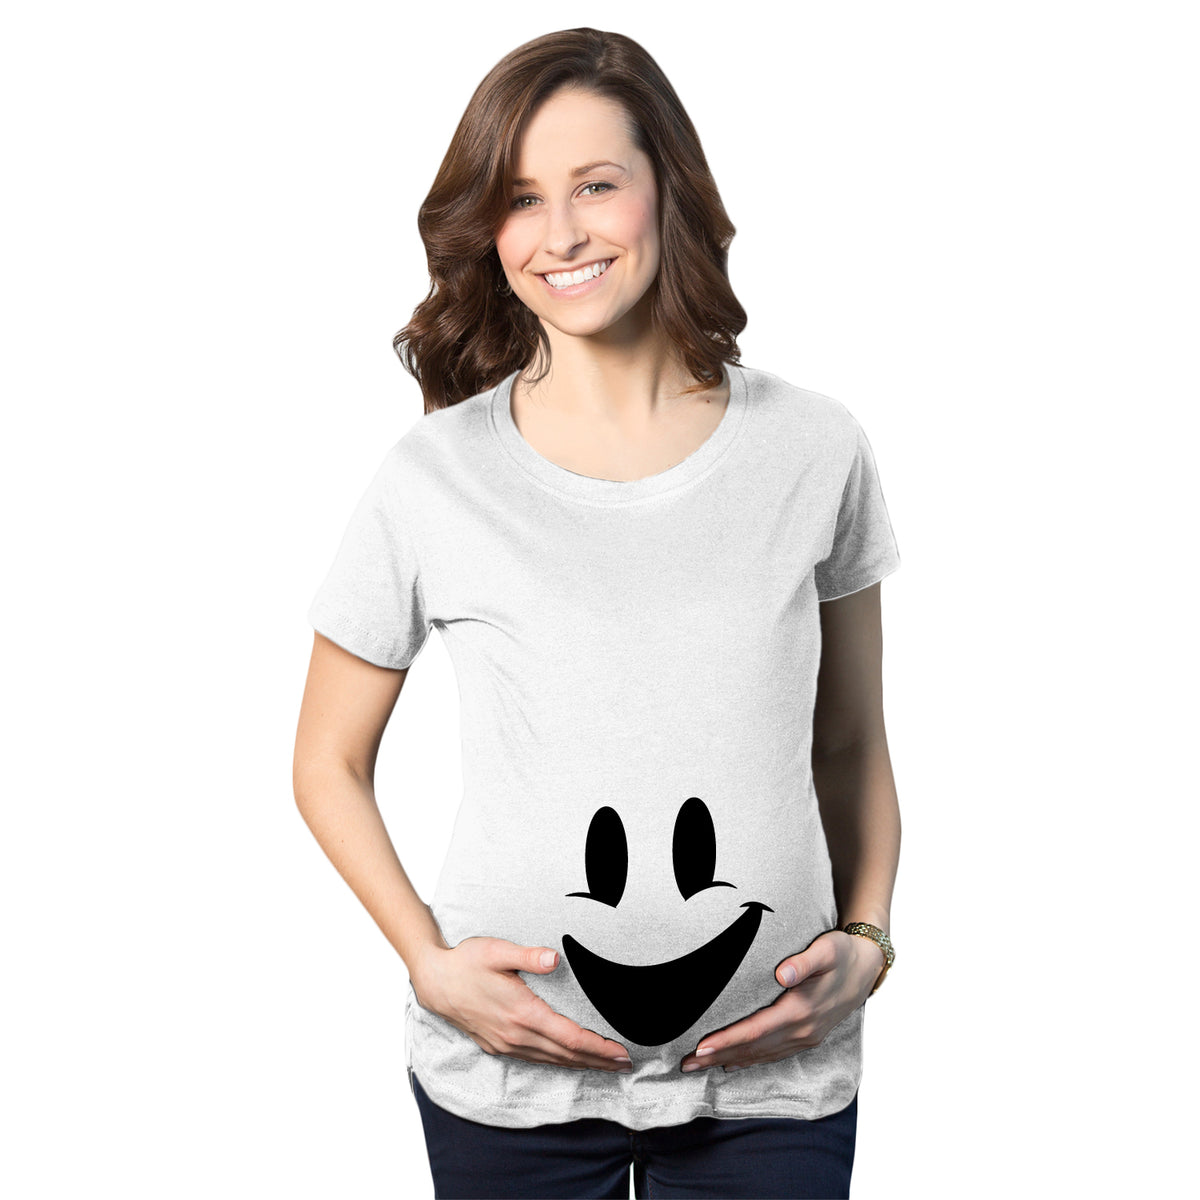 Funny White Smiling Ghost Maternity T Shirt Nerdy Halloween Tee